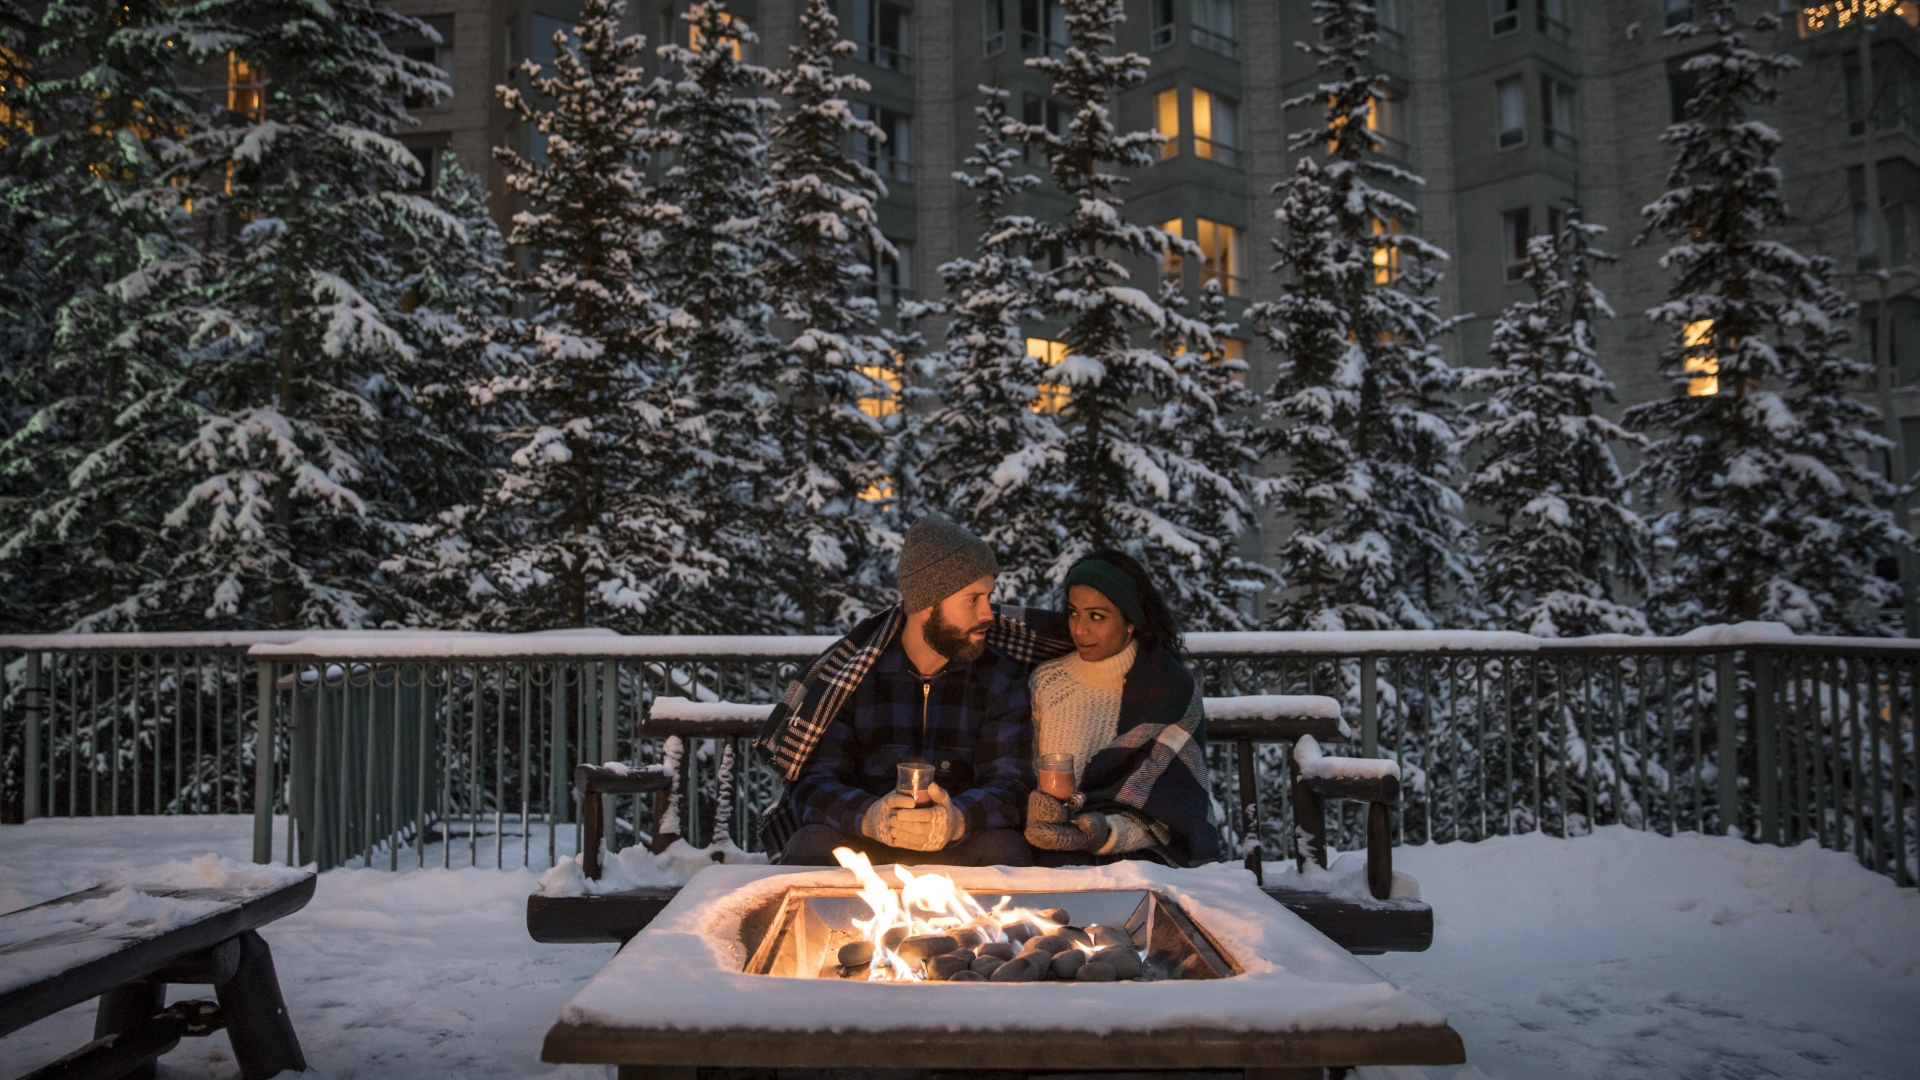 Couple sitting by the outdoor fire pit with snow covered trees in the background at The Rimrock Resort Hotel in Banff National Park